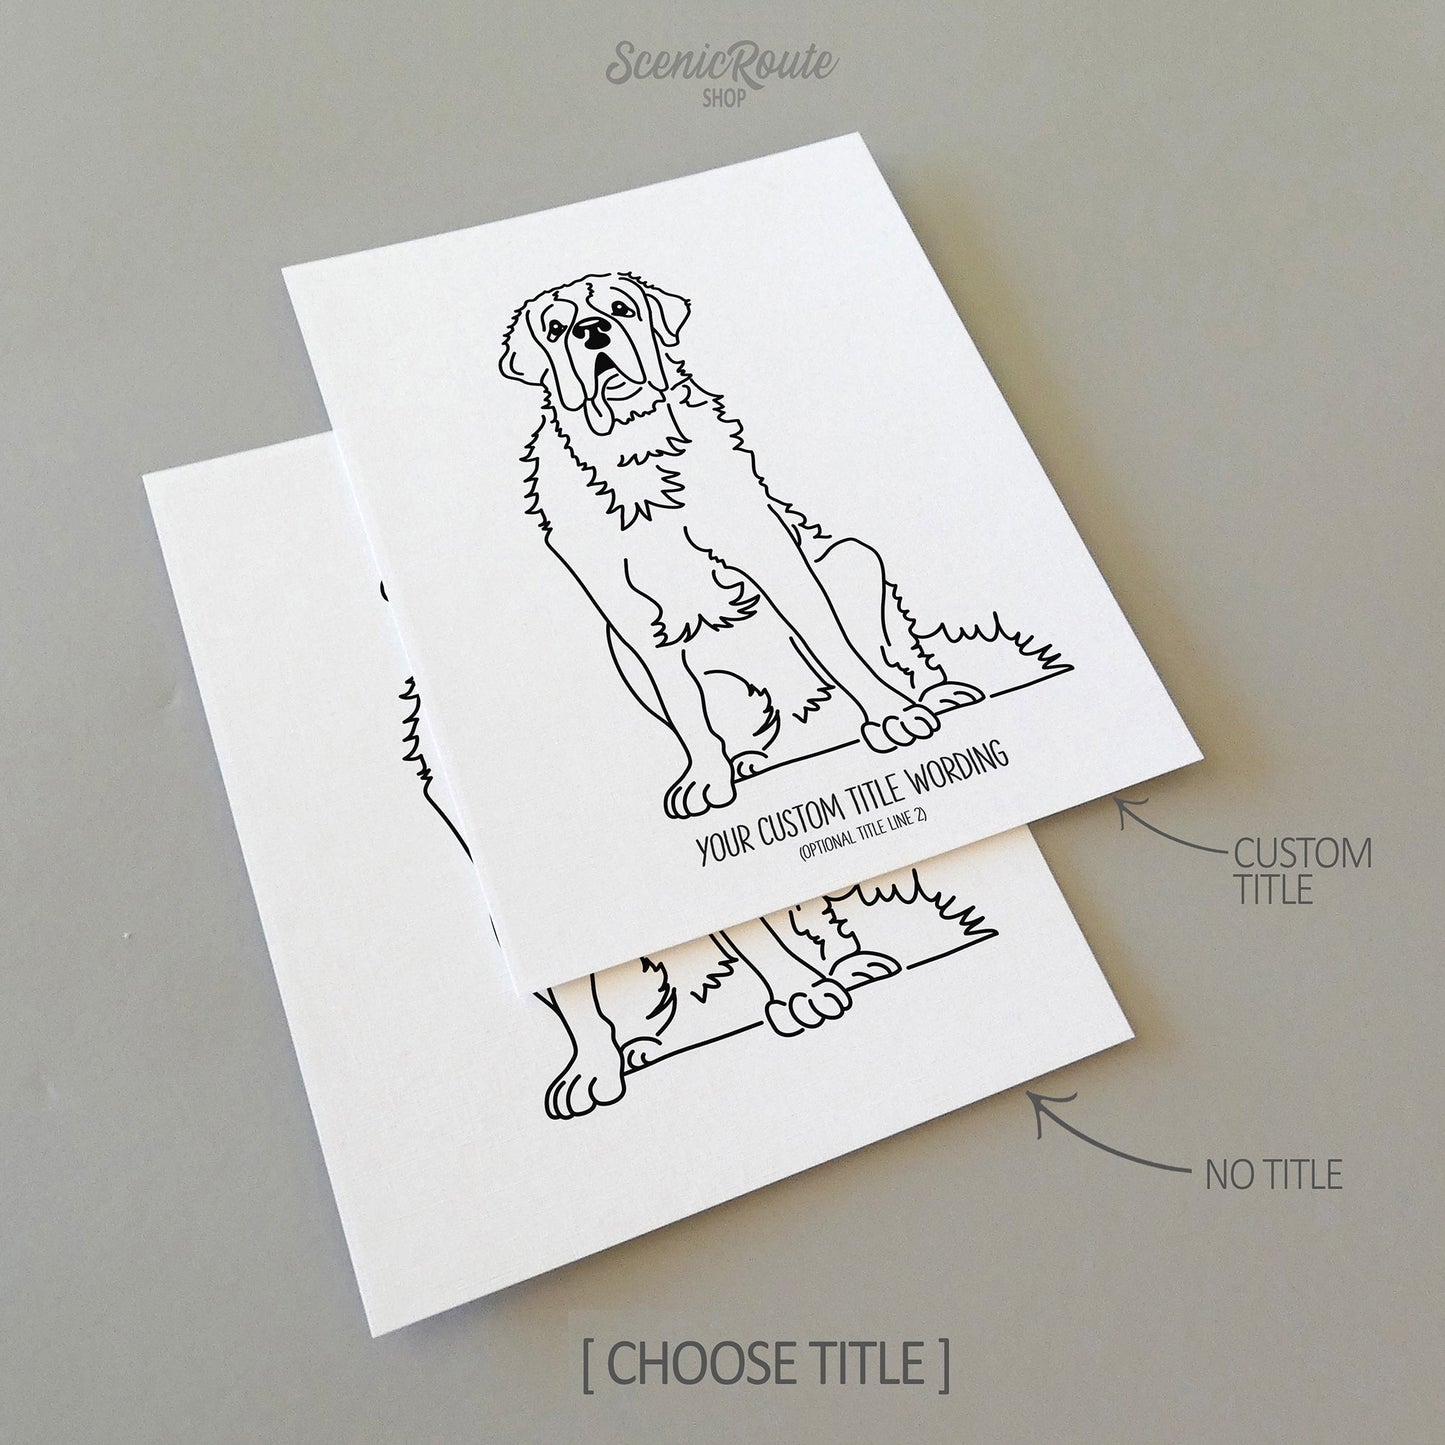 Two line art drawings of a Saint Bernard dog on white linen paper with a gray background.  The pieces are shown with “No Title” and “Custom Title” options for the available art print options.